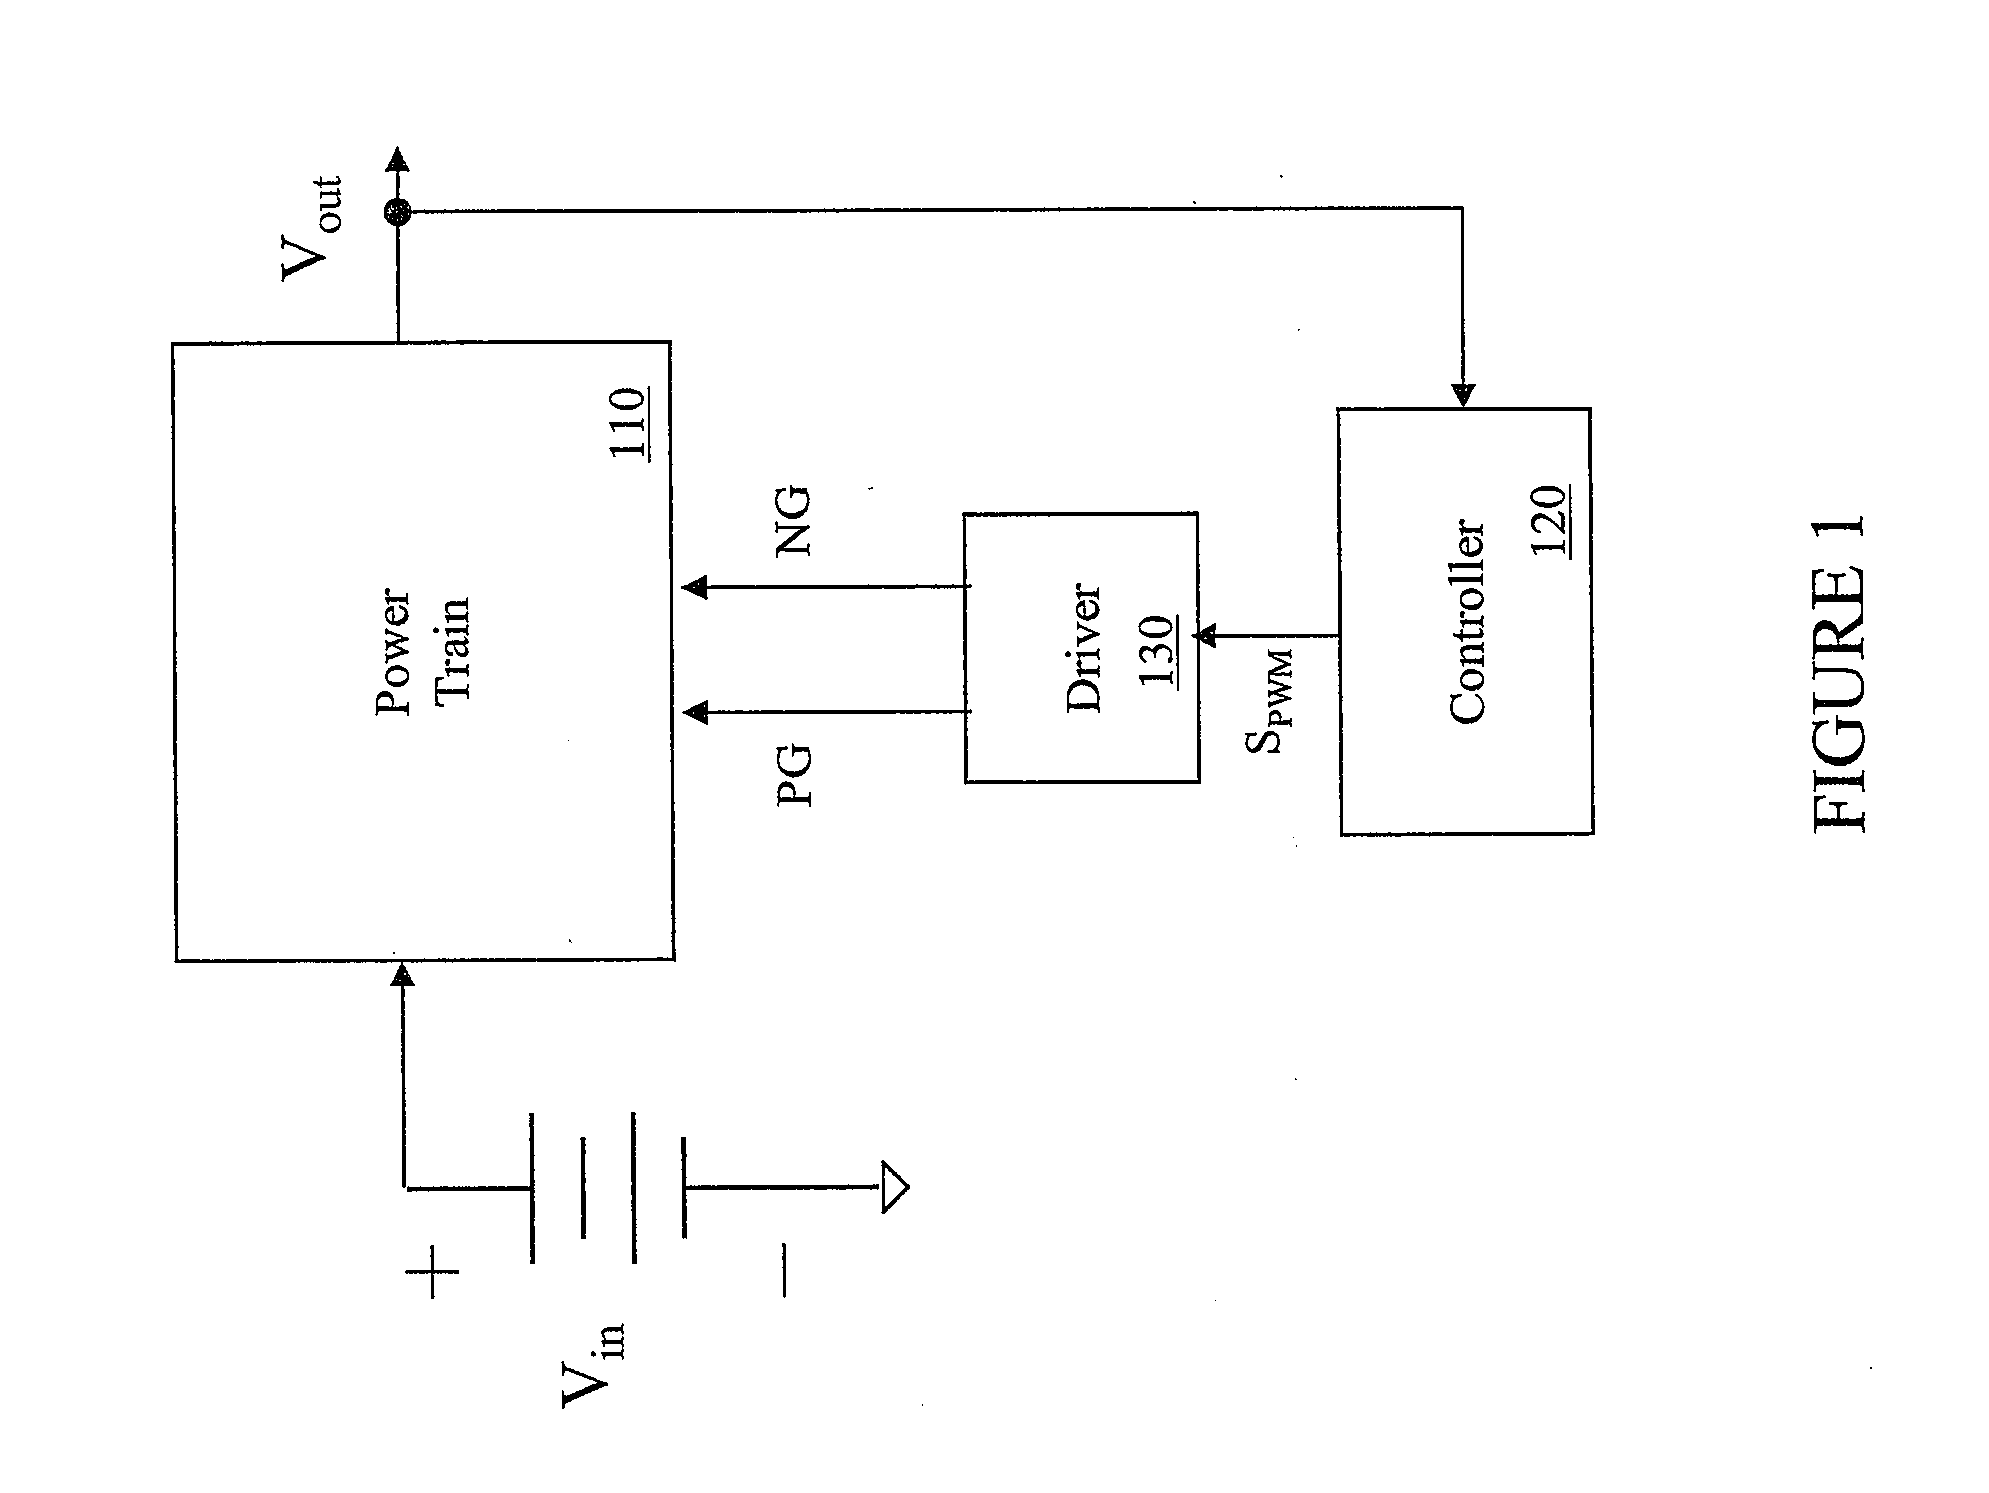 Micromagnetic Device and Method of Forming the Same